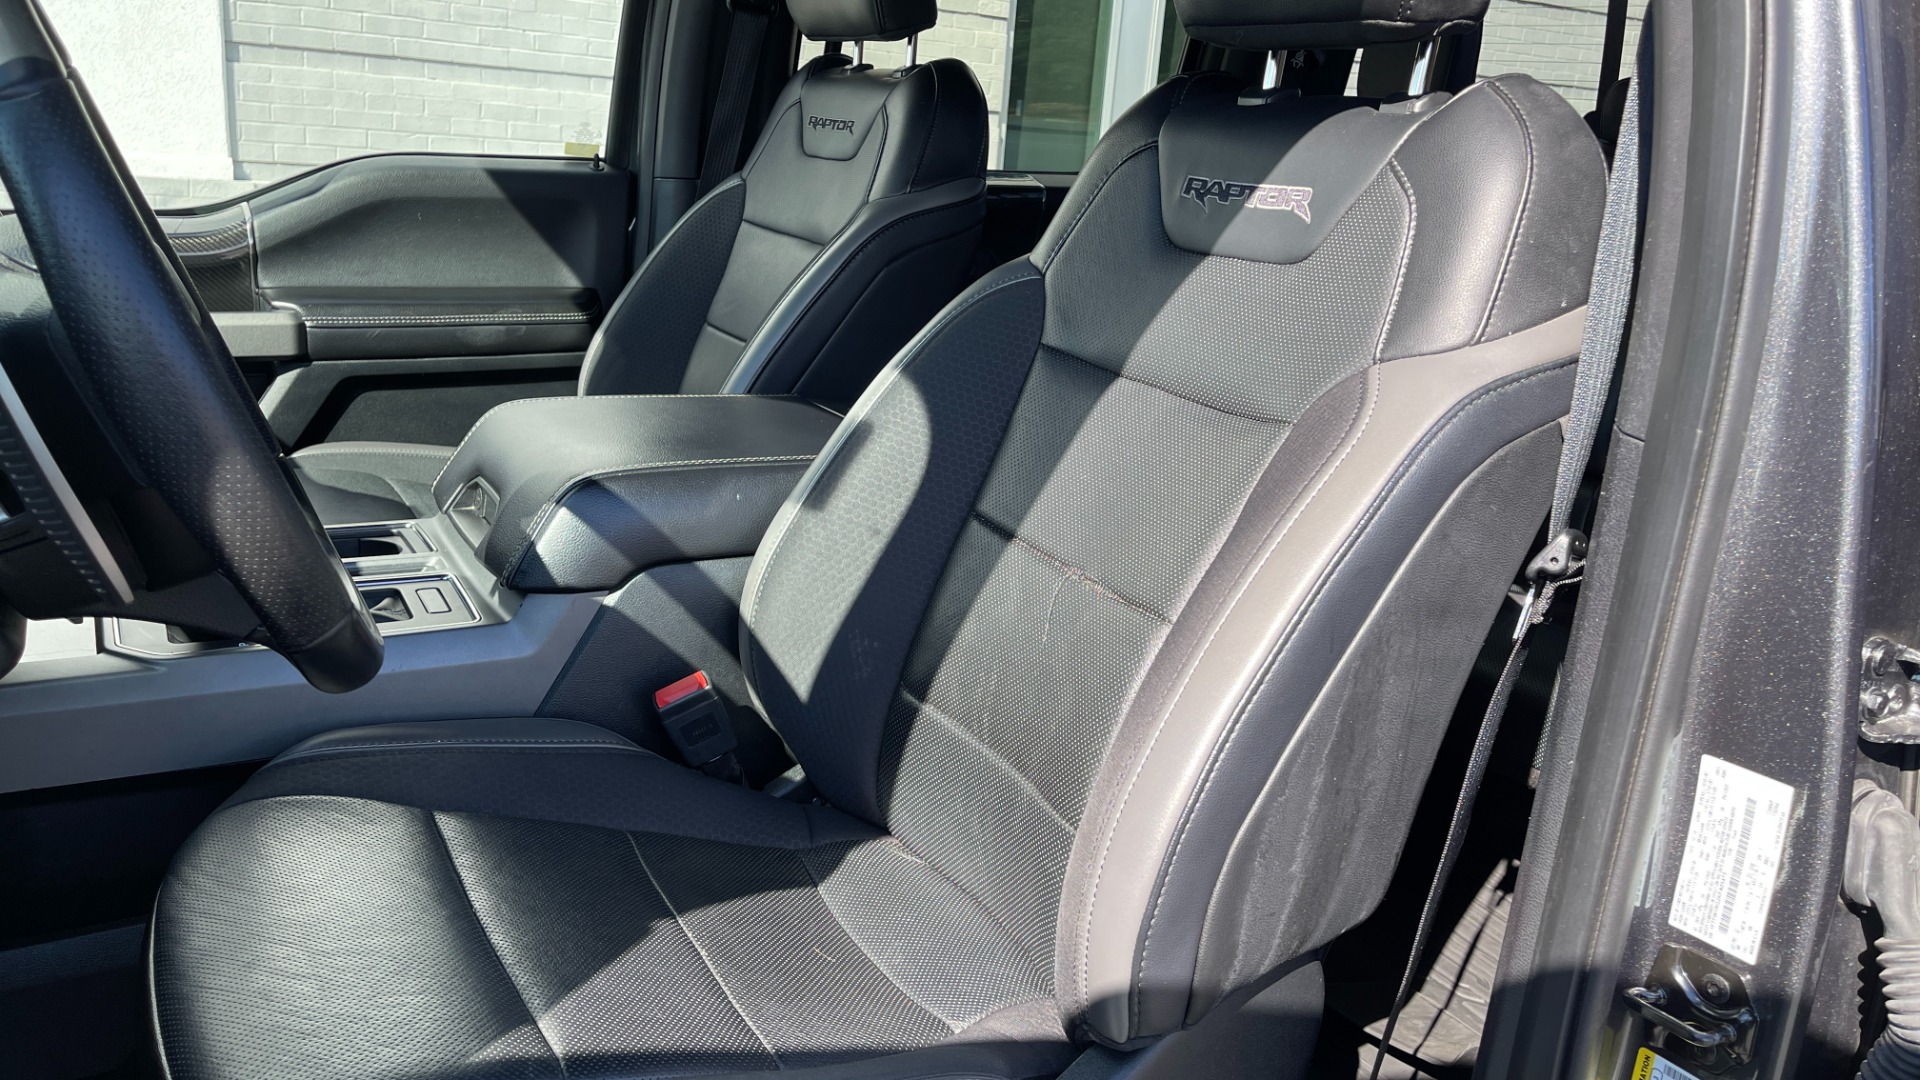 Used 2019 Ford F-150 RAPTOR / 802A PACKAGE / LIGHT PODS / CARBON FIBER / PANORAMIC ROOF for sale Sold at Formula Imports in Charlotte NC 28227 16